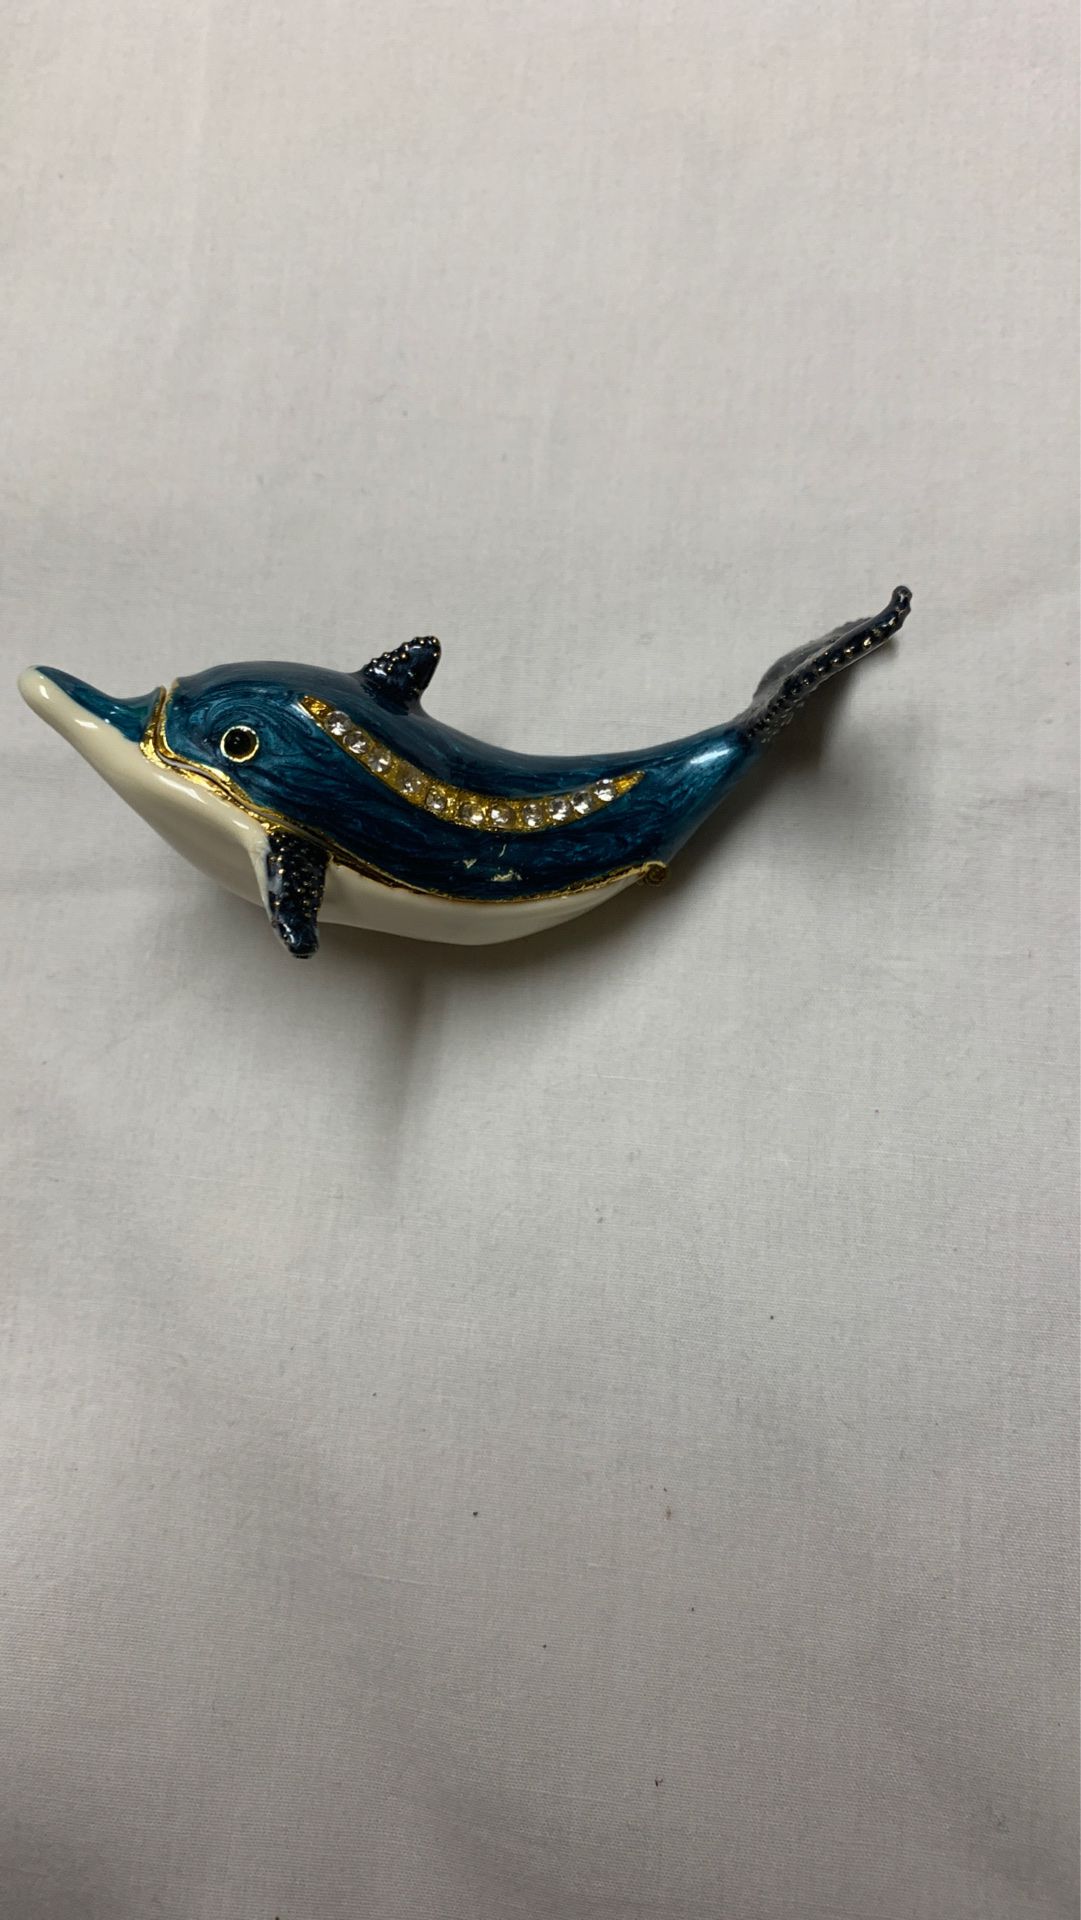 Brand new hinged collection box whale paid 25 bought from crackle barrel